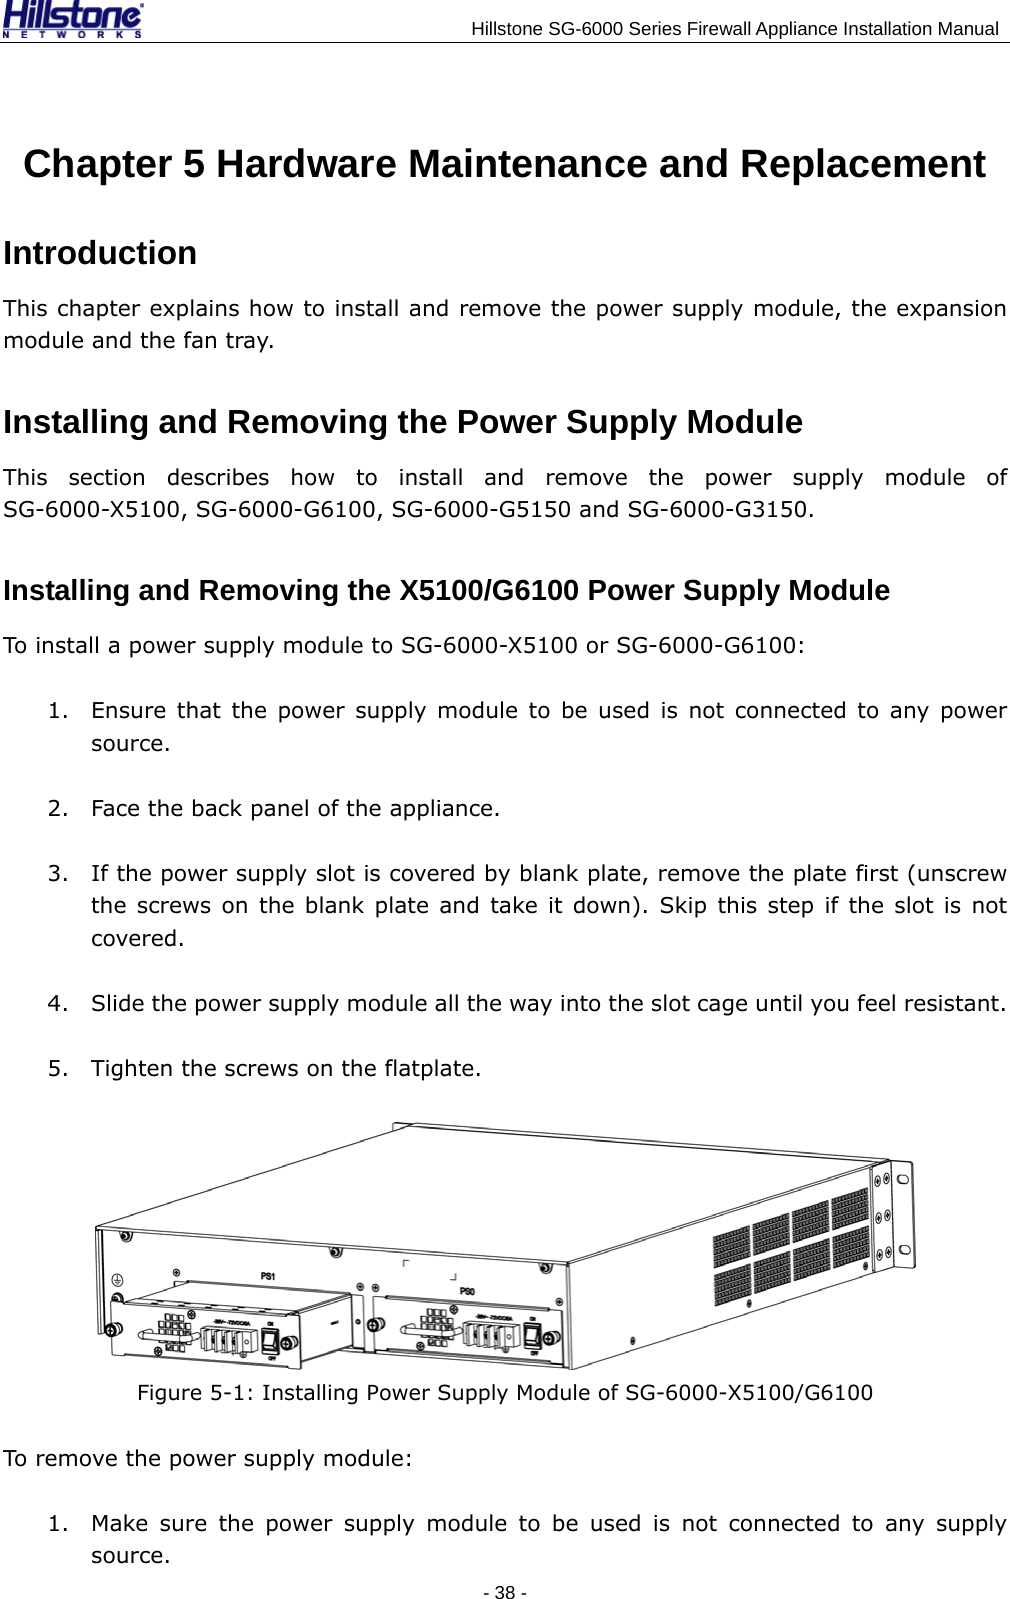                                    Hillstone SG-6000 Series Firewall Appliance Installation Manual Chapter 5 Hardware Maintenance and Replacement Introduction This chapter explains how to install and remove the power supply module, the expansion module and the fan tray. Installing and Removing the Power Supply Module This section describes how to install and remove the power supply module of SG-6000-X5100, SG-6000-G6100, SG-6000-G5150 and SG-6000-G3150. Installing and Removing the X5100/G6100 Power Supply Module To install a power supply module to SG-6000-X5100 or SG-6000-G6100: 1. Ensure that the power supply module to be used is not connected to any power source. 2. Face the back panel of the appliance. 3. If the power supply slot is covered by blank plate, remove the plate first (unscrew the screws on the blank plate and take it down). Skip this step if the slot is not covered. 4. Slide the power supply module all the way into the slot cage until you feel resistant. 5. Tighten the screws on the flatplate.  Figure 5-1: Installing Power Supply Module of SG-6000-X5100/G6100 To remove the power supply module: 1. Make sure the power supply module to be used is not connected to any supply source. - 38 -  